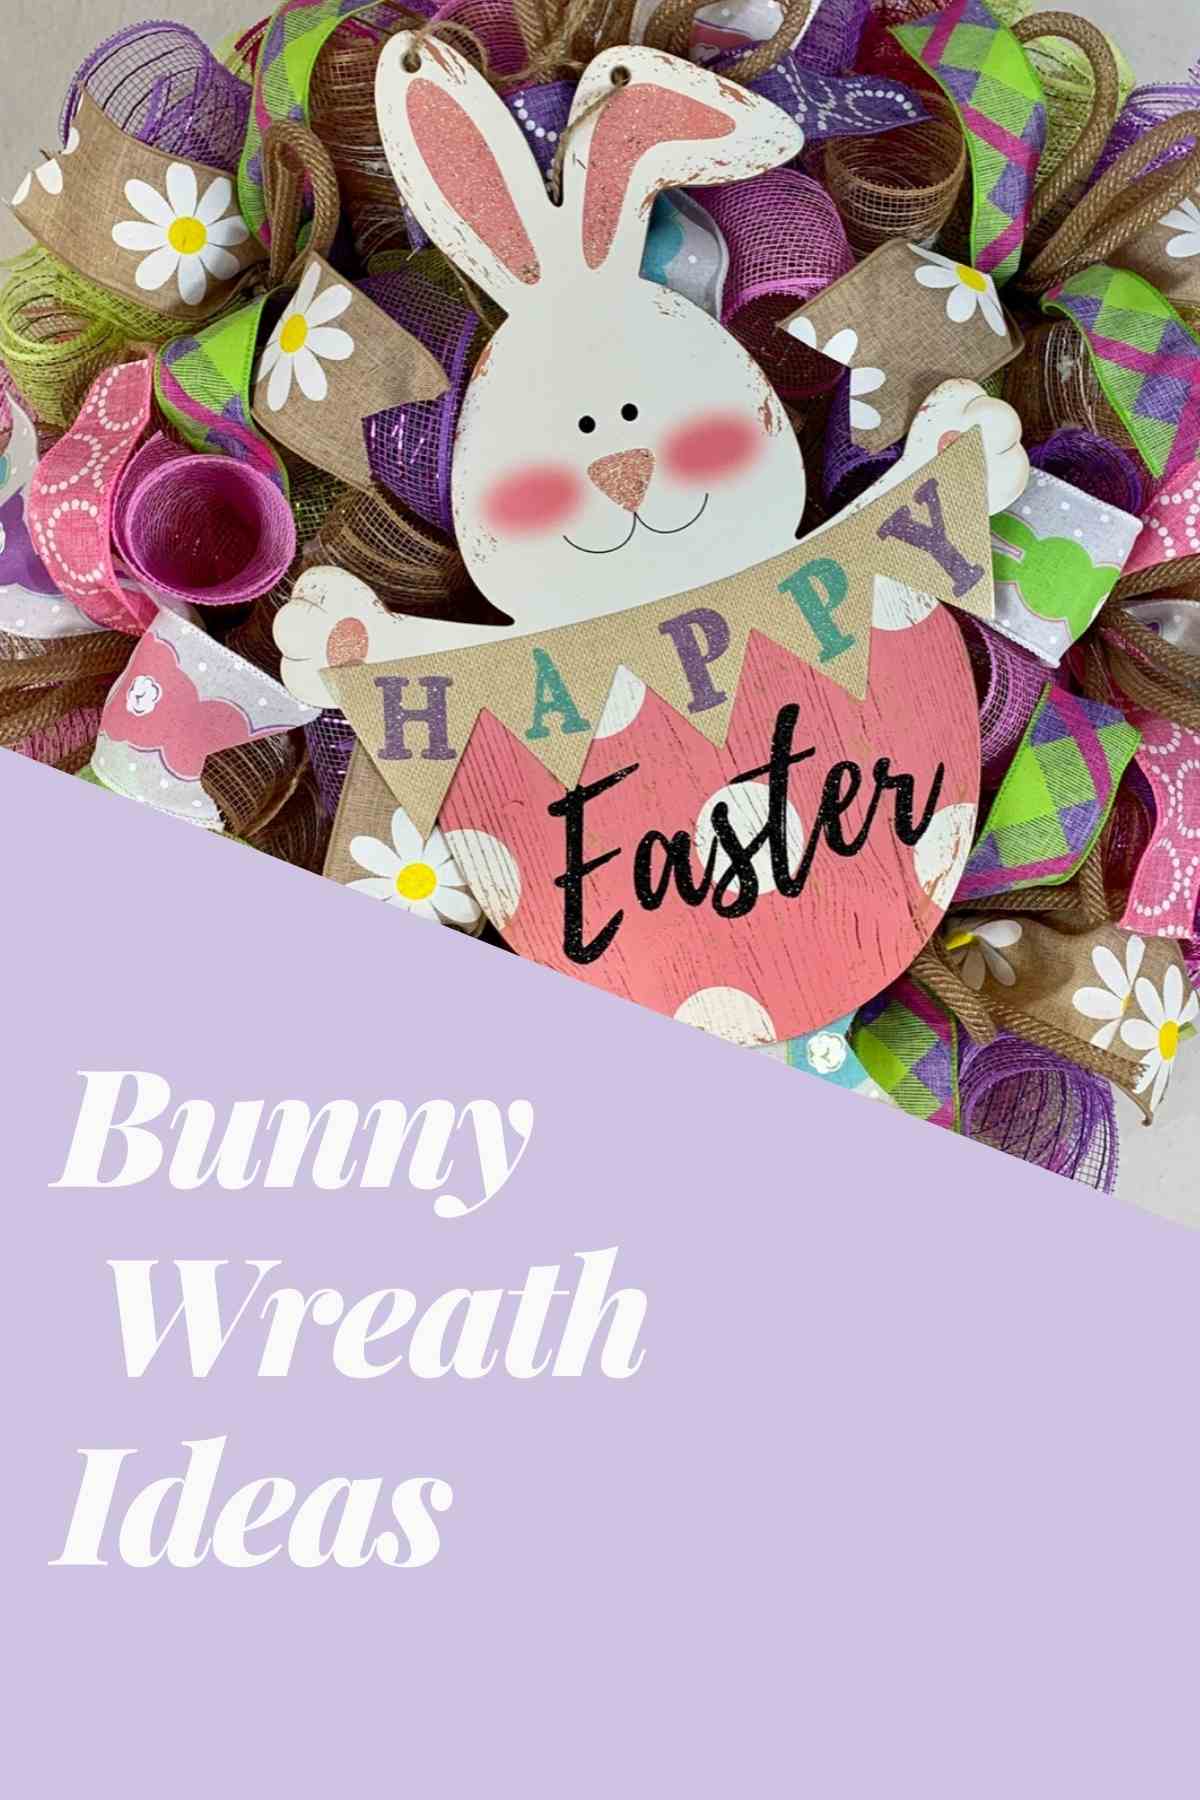 Happy Easter Wreaths with bunnies